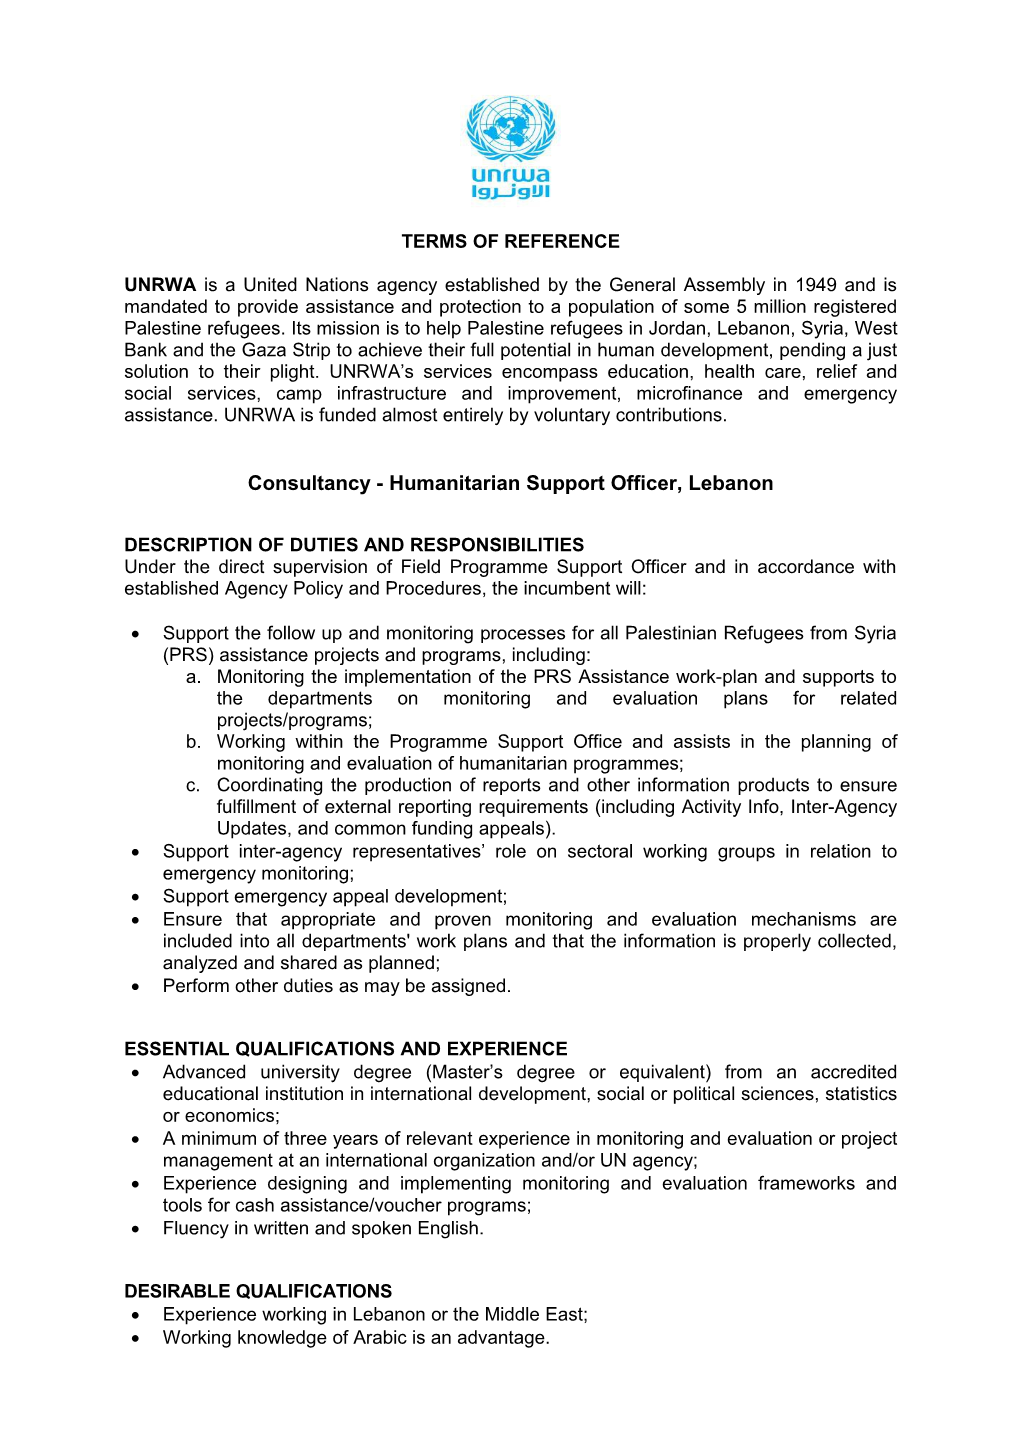 Consultancy - Humanitarian Support Officer, Lebanon